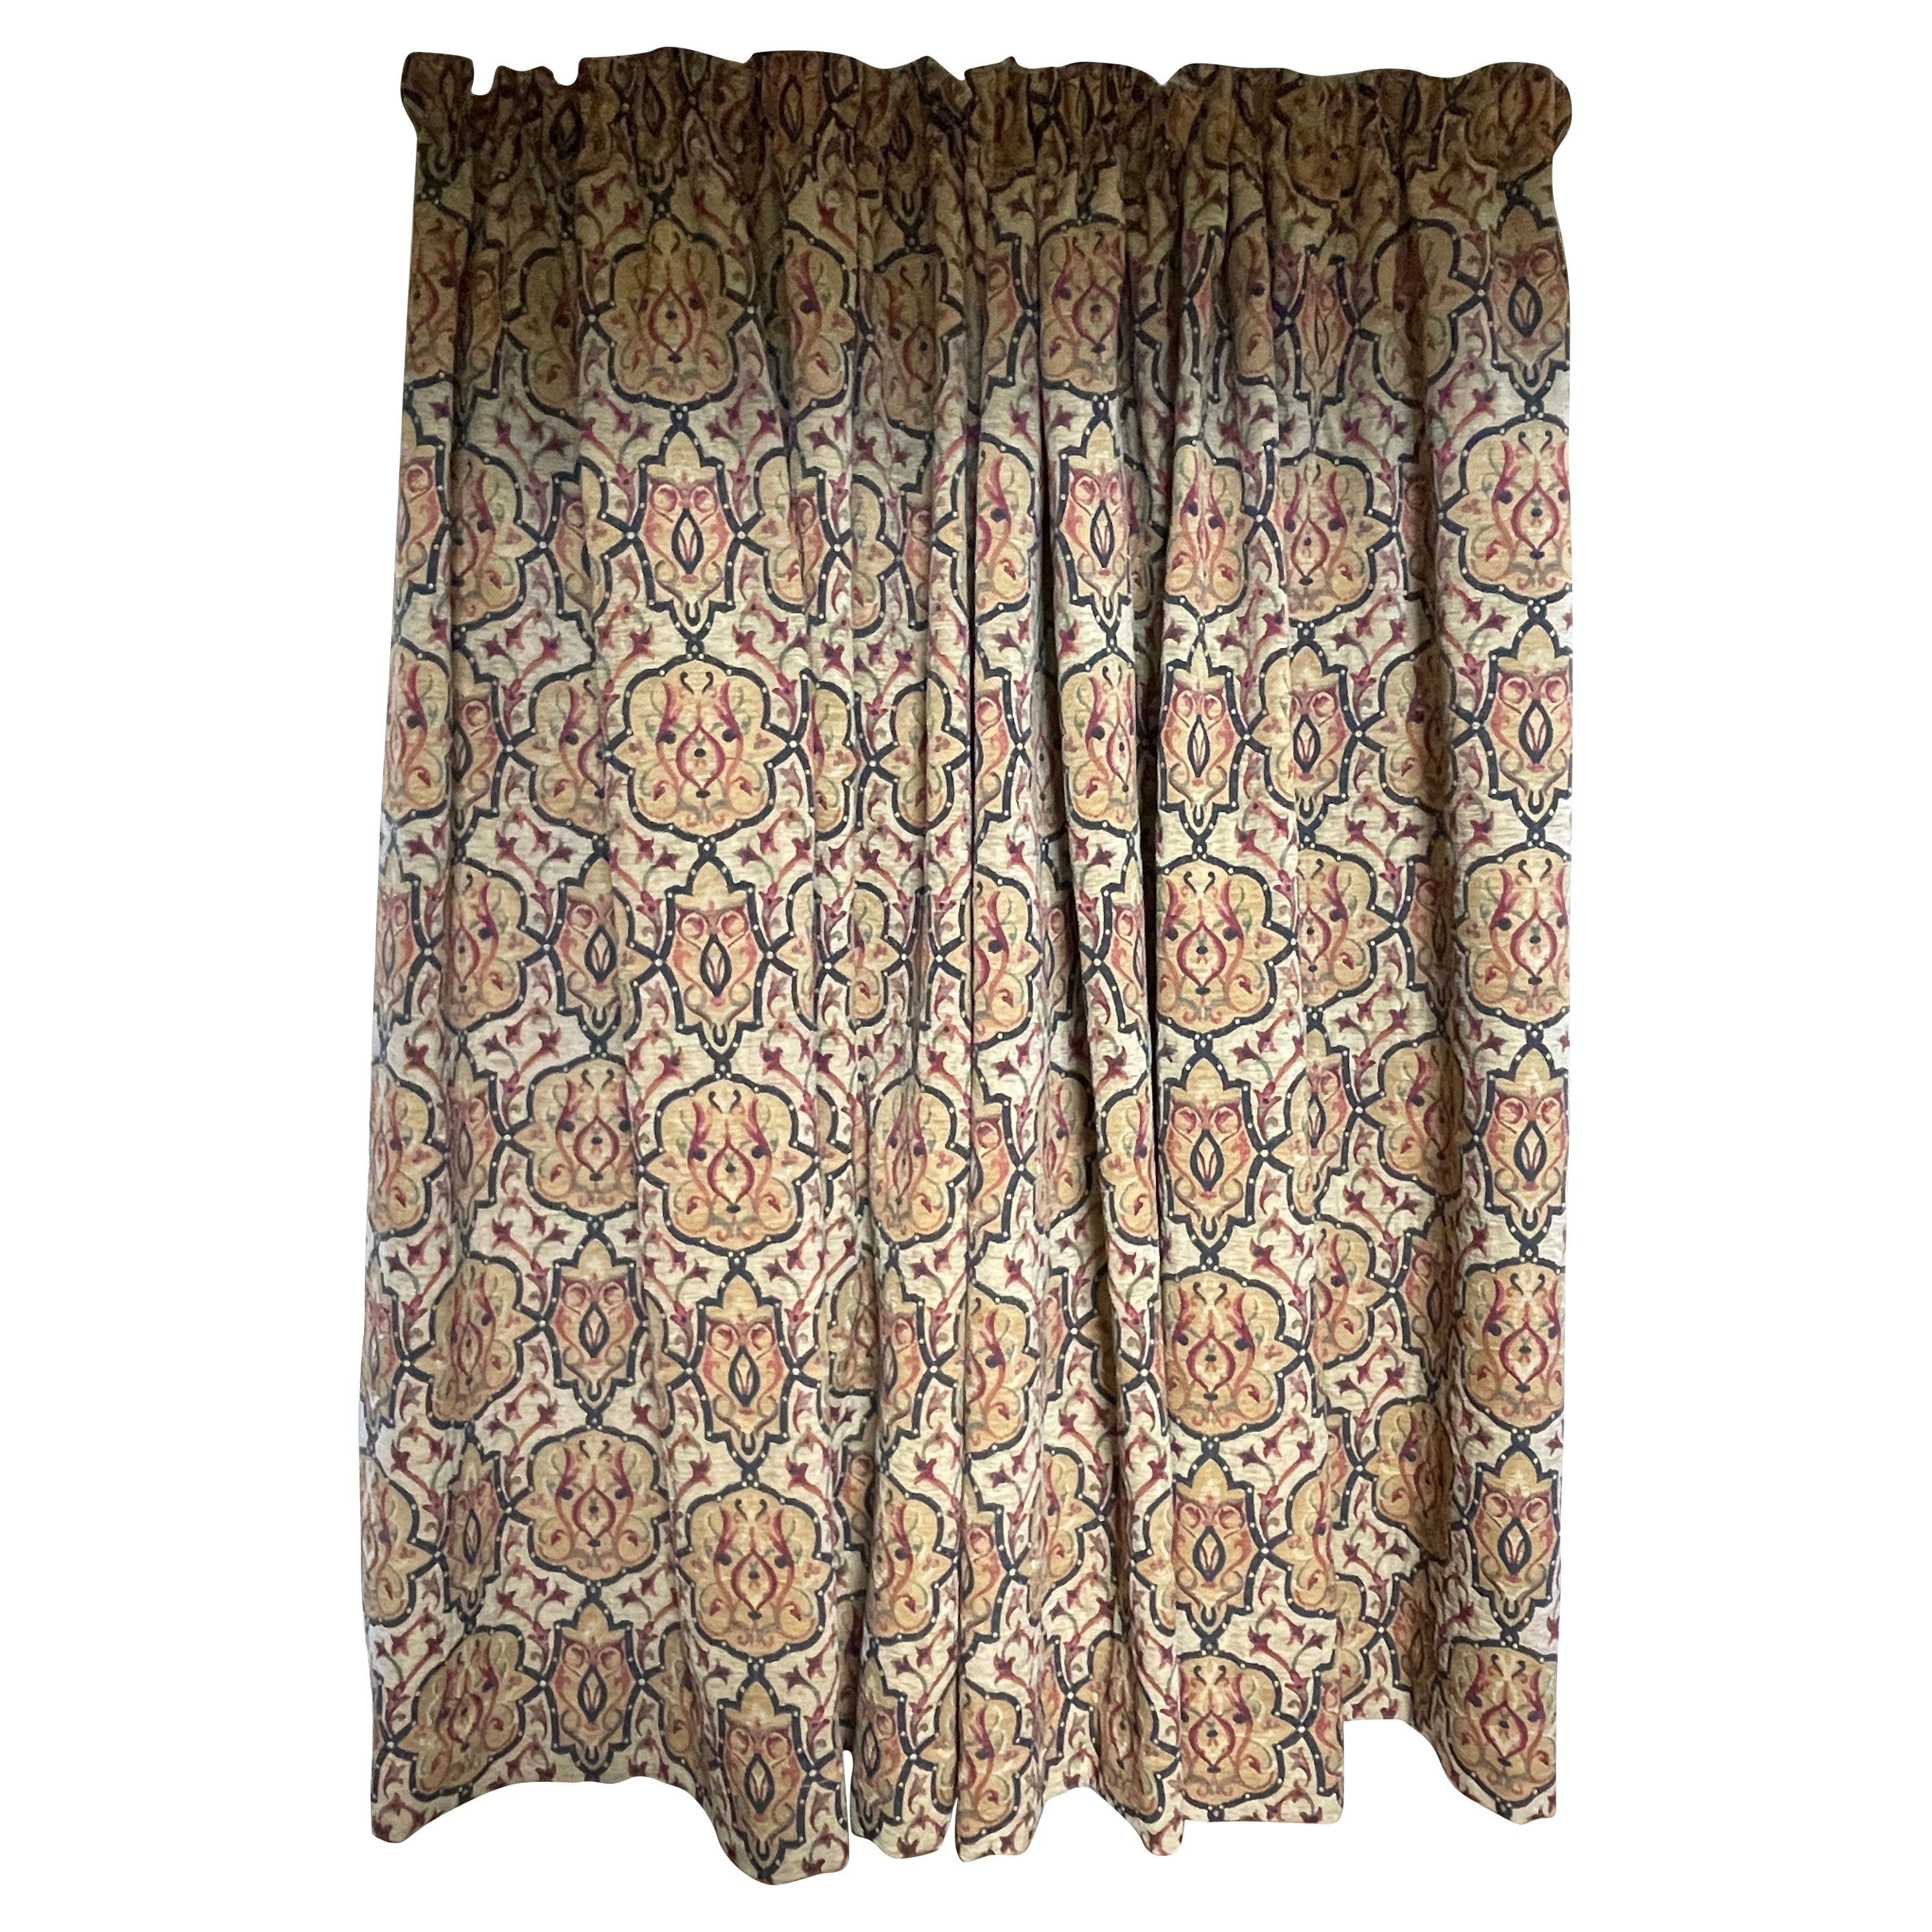 Vintage Brocade Strapwork Curtains Arts & Crafts style 82"high 317"long